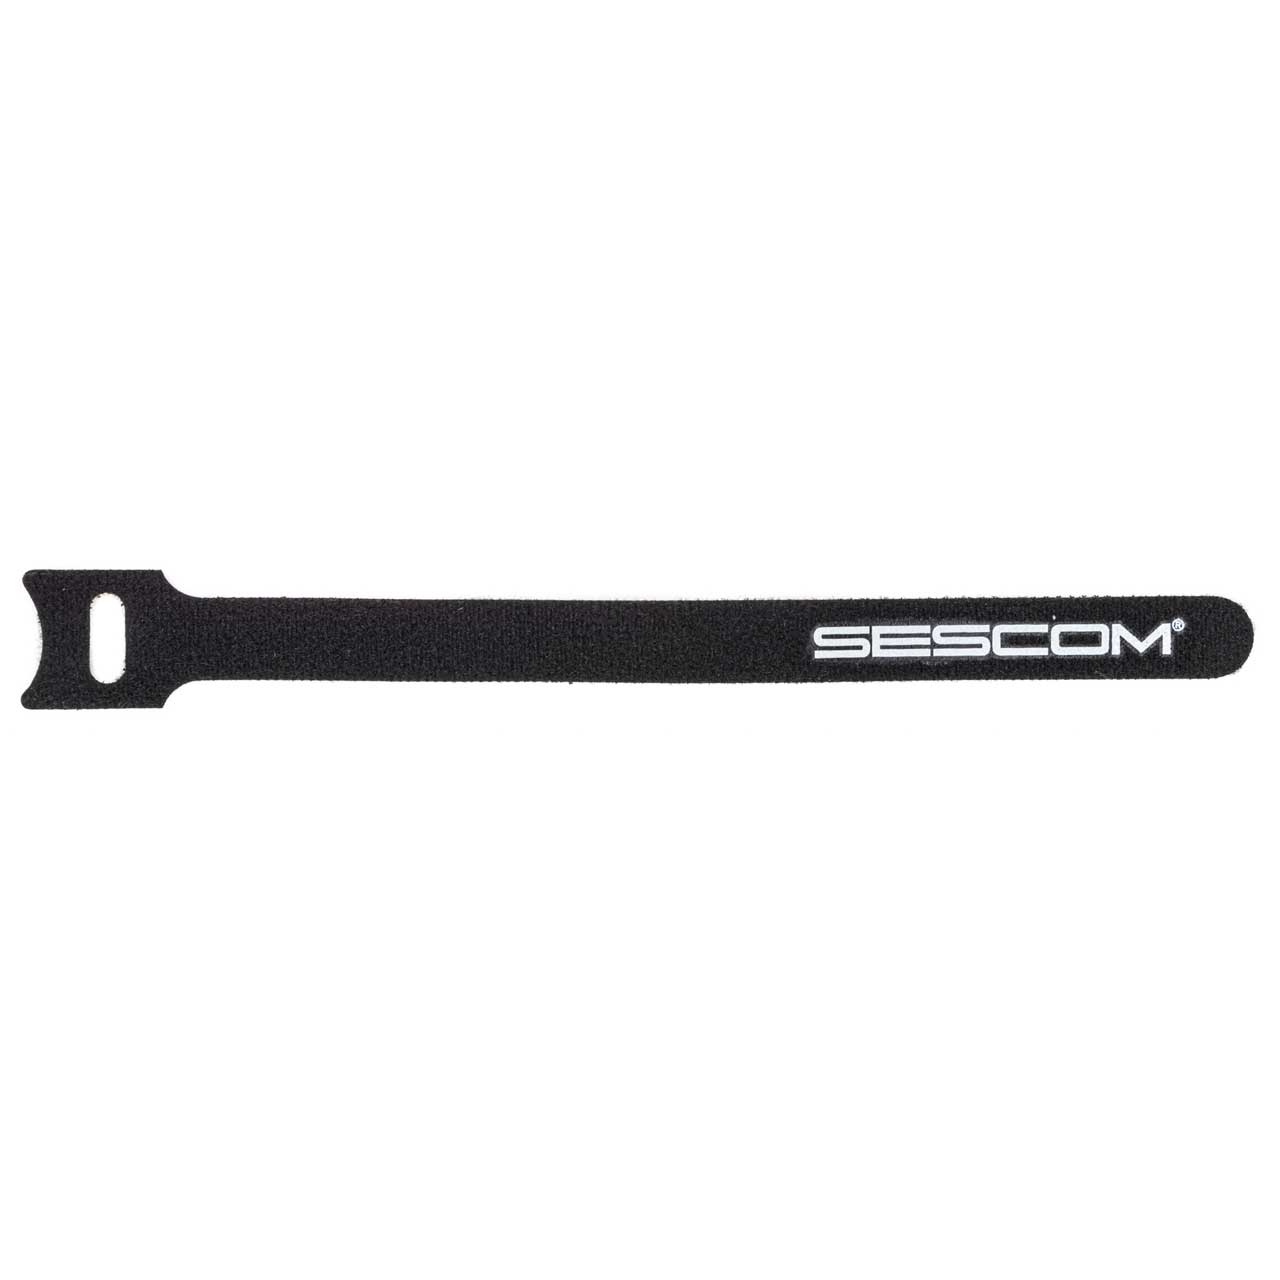 Sescom Hook and Loop Cable Wrap 12mm x 180mm Black with White Logo - 1000 Pack SES-HKNLP-1000PK